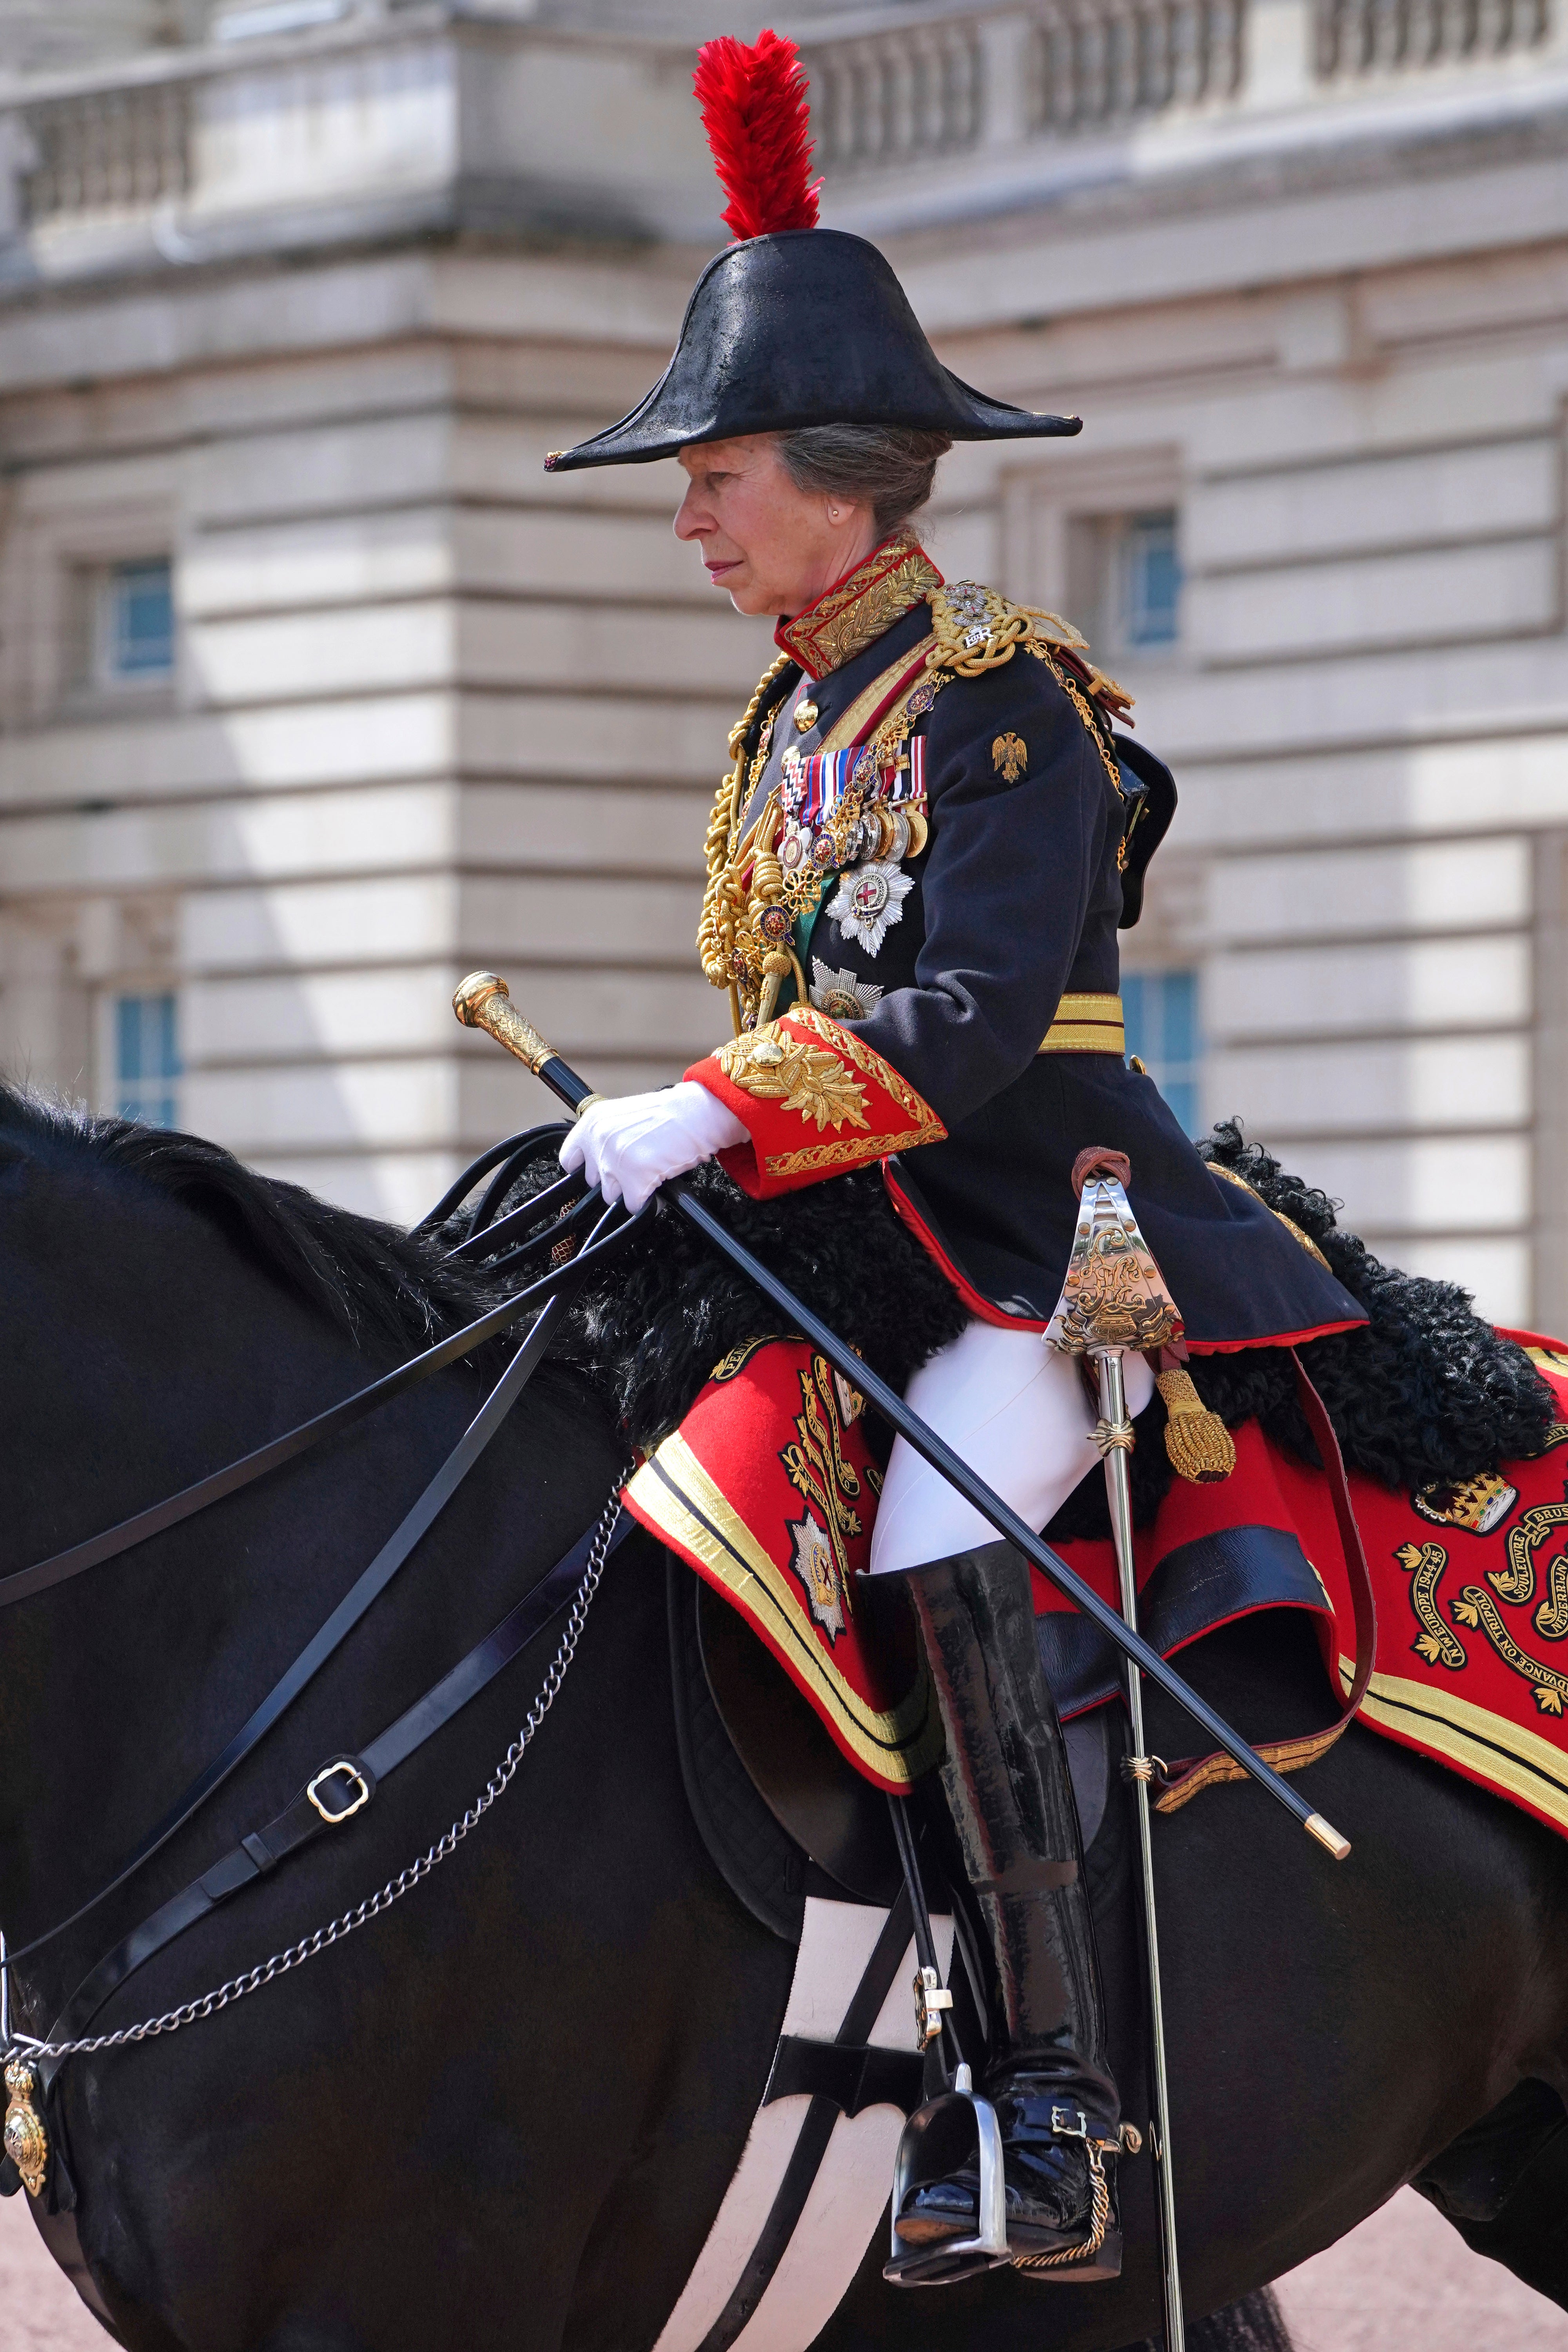 Princess Anne is a experienced rider and even competed in the equestrian category at the 1976 Olympics.